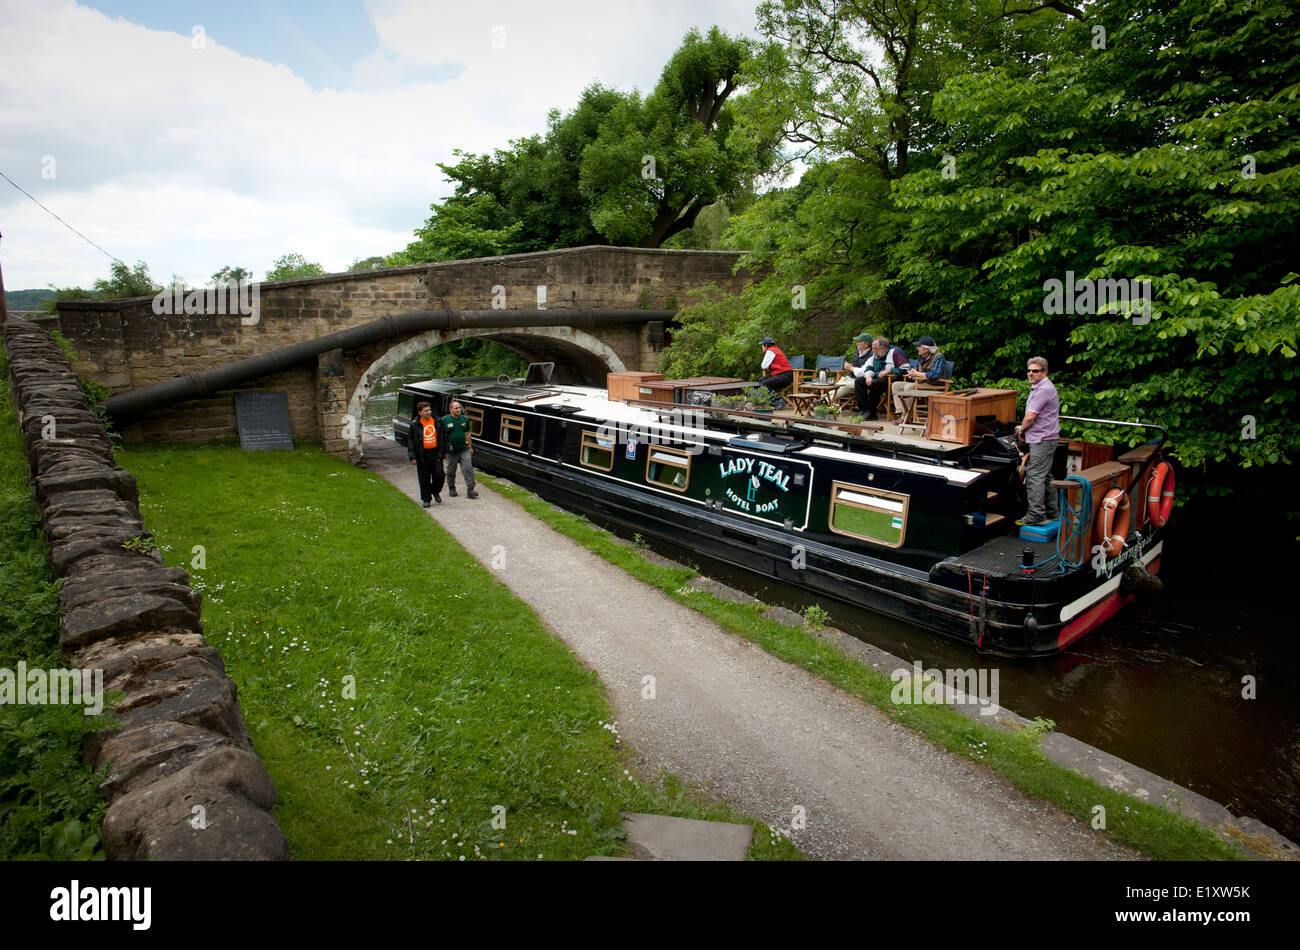 Dowley Gap Locks, Bingley to Saltaire on Leeds and Liverpool Canal, West Yorkshire. June 2014 Lady Teal Hotel Canal Boat Stock Photo